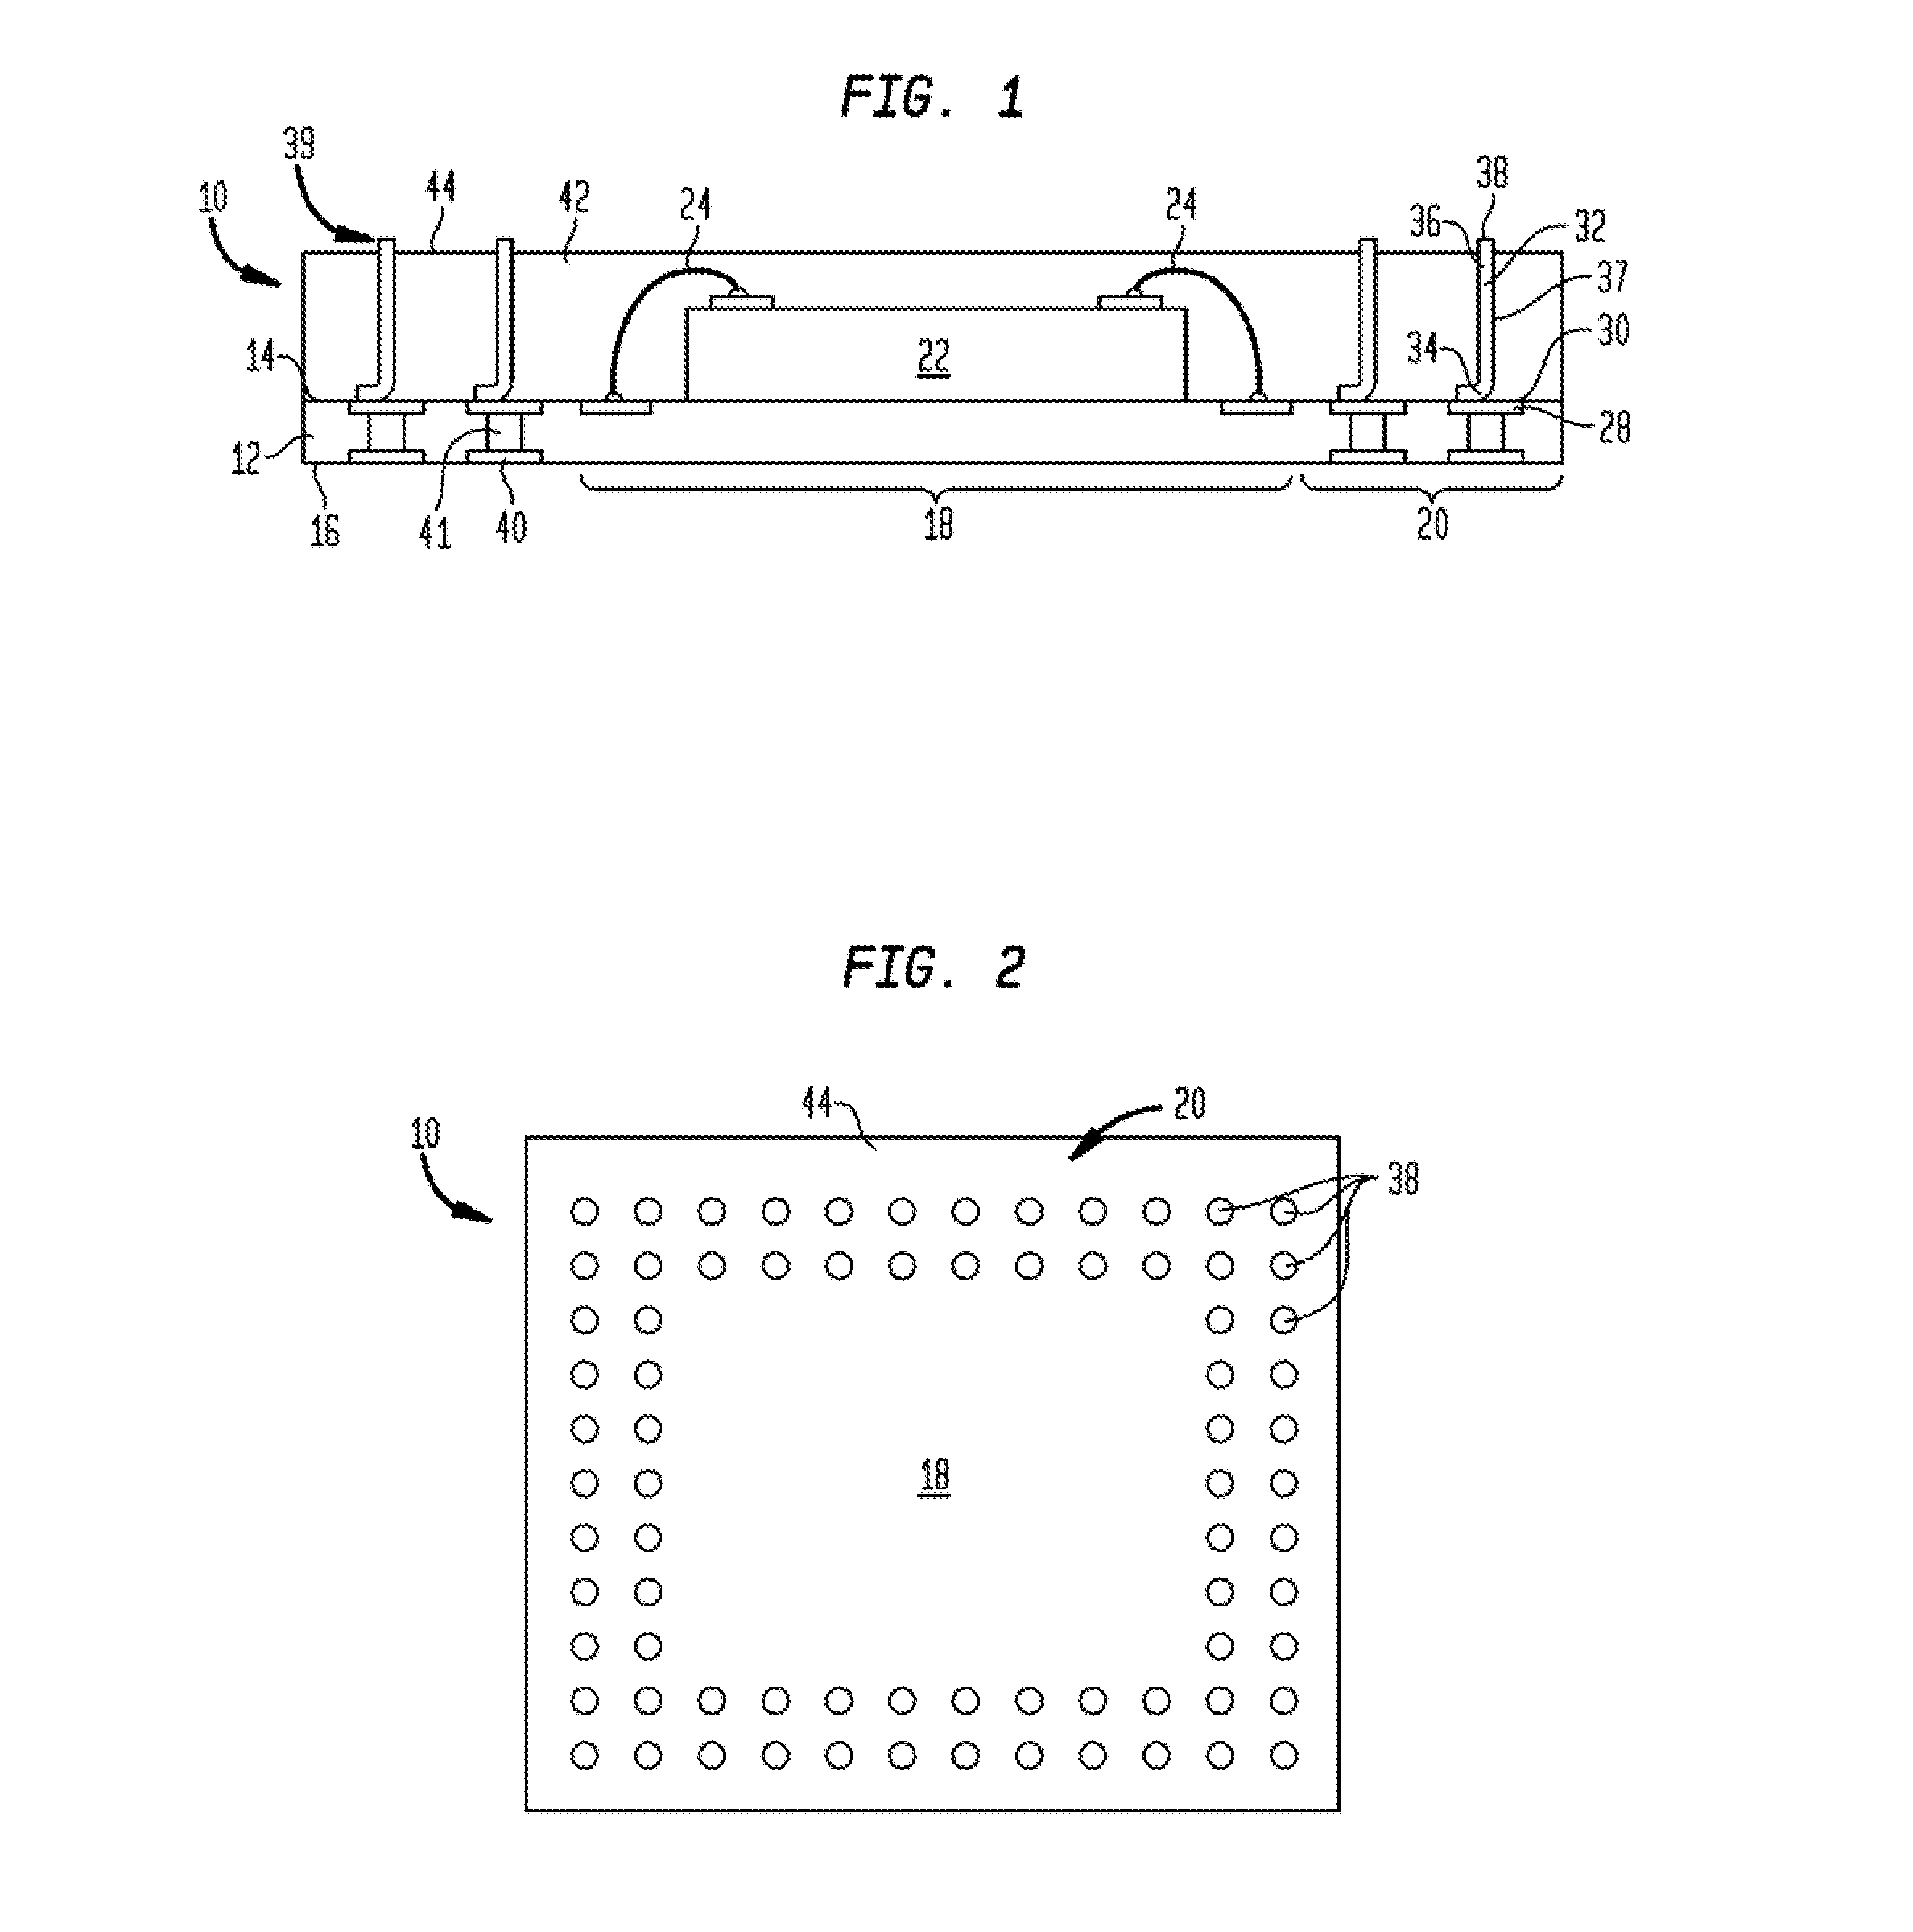 Package-on-package assembly with wire bond vias